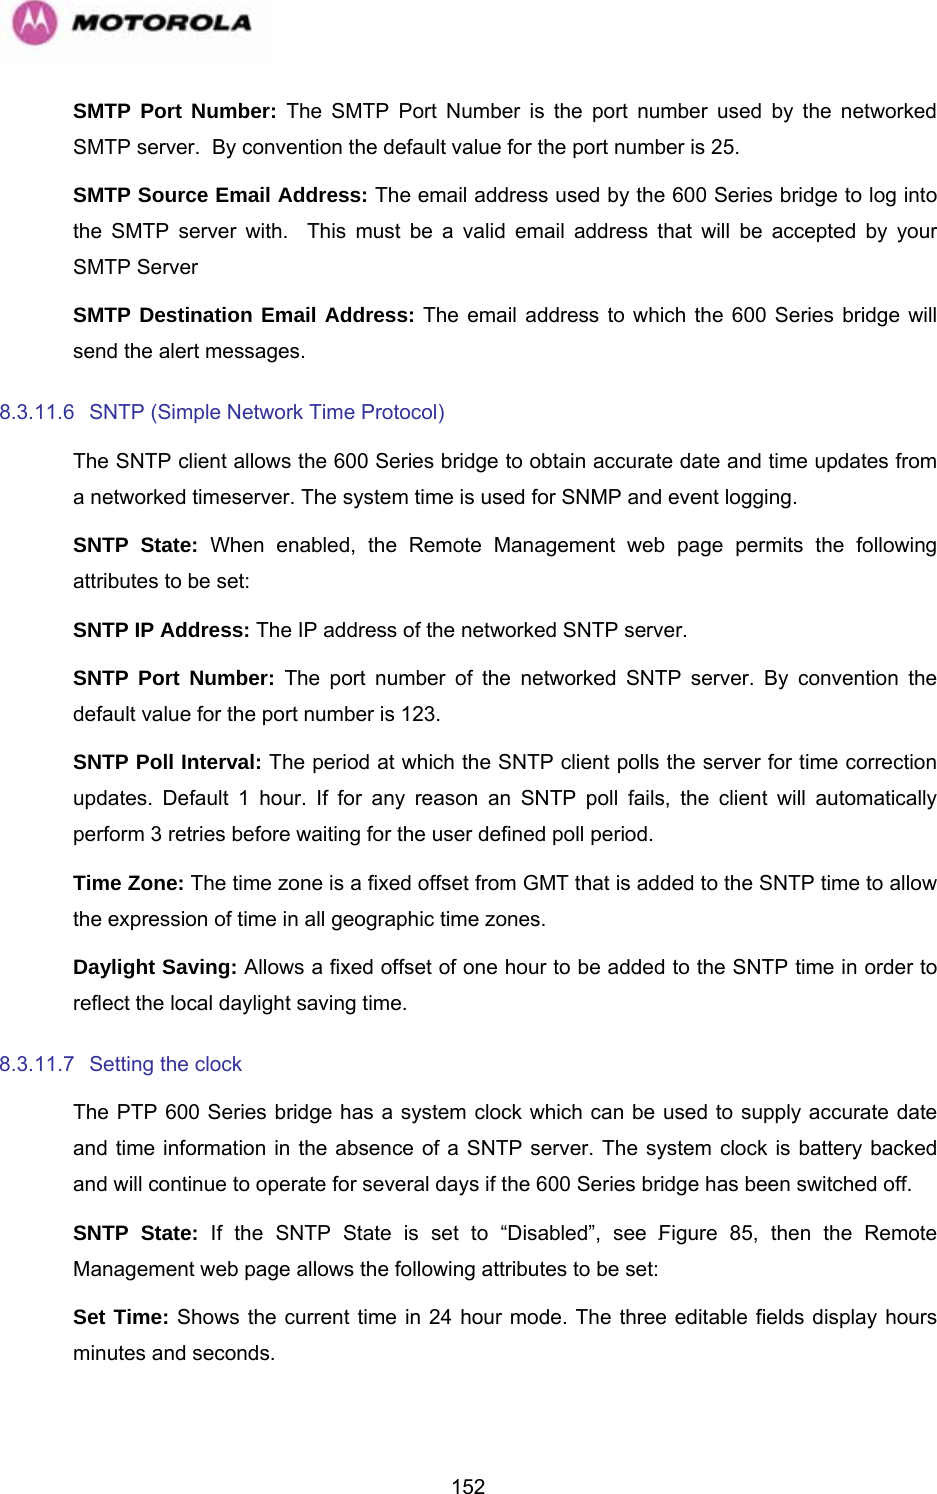   152SMTP Port Number: The SMTP Port Number is the port number used by the networked SMTP server.  By convention the default value for the port number is 25. SMTP Source Email Address: The email address used by the 600 Series bridge to log into the SMTP server with.  This must be a valid email address that will be accepted by your SMTP Server SMTP Destination Email Address: The email address to which the 600 Series bridge will send the alert messages. 8.3.11.6  SNTP (Simple Network Time Protocol) The SNTP client allows the 600 Series bridge to obtain accurate date and time updates from a networked timeserver. The system time is used for SNMP and event logging. SNTP State: When enabled, the Remote Management web page permits the following attributes to be set: SNTP IP Address: The IP address of the networked SNTP server. SNTP Port Number: The port number of the networked SNTP server. By convention the default value for the port number is 123. SNTP Poll Interval: The period at which the SNTP client polls the server for time correction updates. Default 1 hour. If for any reason an SNTP poll fails, the client will automatically perform 3 retries before waiting for the user defined poll period. Time Zone: The time zone is a fixed offset from GMT that is added to the SNTP time to allow the expression of time in all geographic time zones. Daylight Saving: Allows a fixed offset of one hour to be added to the SNTP time in order to reflect the local daylight saving time. 8.3.11.7  Setting the clock  The PTP 600 Series bridge has a system clock which can be used to supply accurate date and time information in the absence of a SNTP server. The system clock is battery backed and will continue to operate for several days if the 600 Series bridge has been switched off. SNTP State: If the SNTP State is set to “Disabled”, see 1148HFigure 85, then the Remote Management web page allows the following attributes to be set: Set Time: Shows the current time in 24 hour mode. The three editable fields display hours minutes and seconds. 